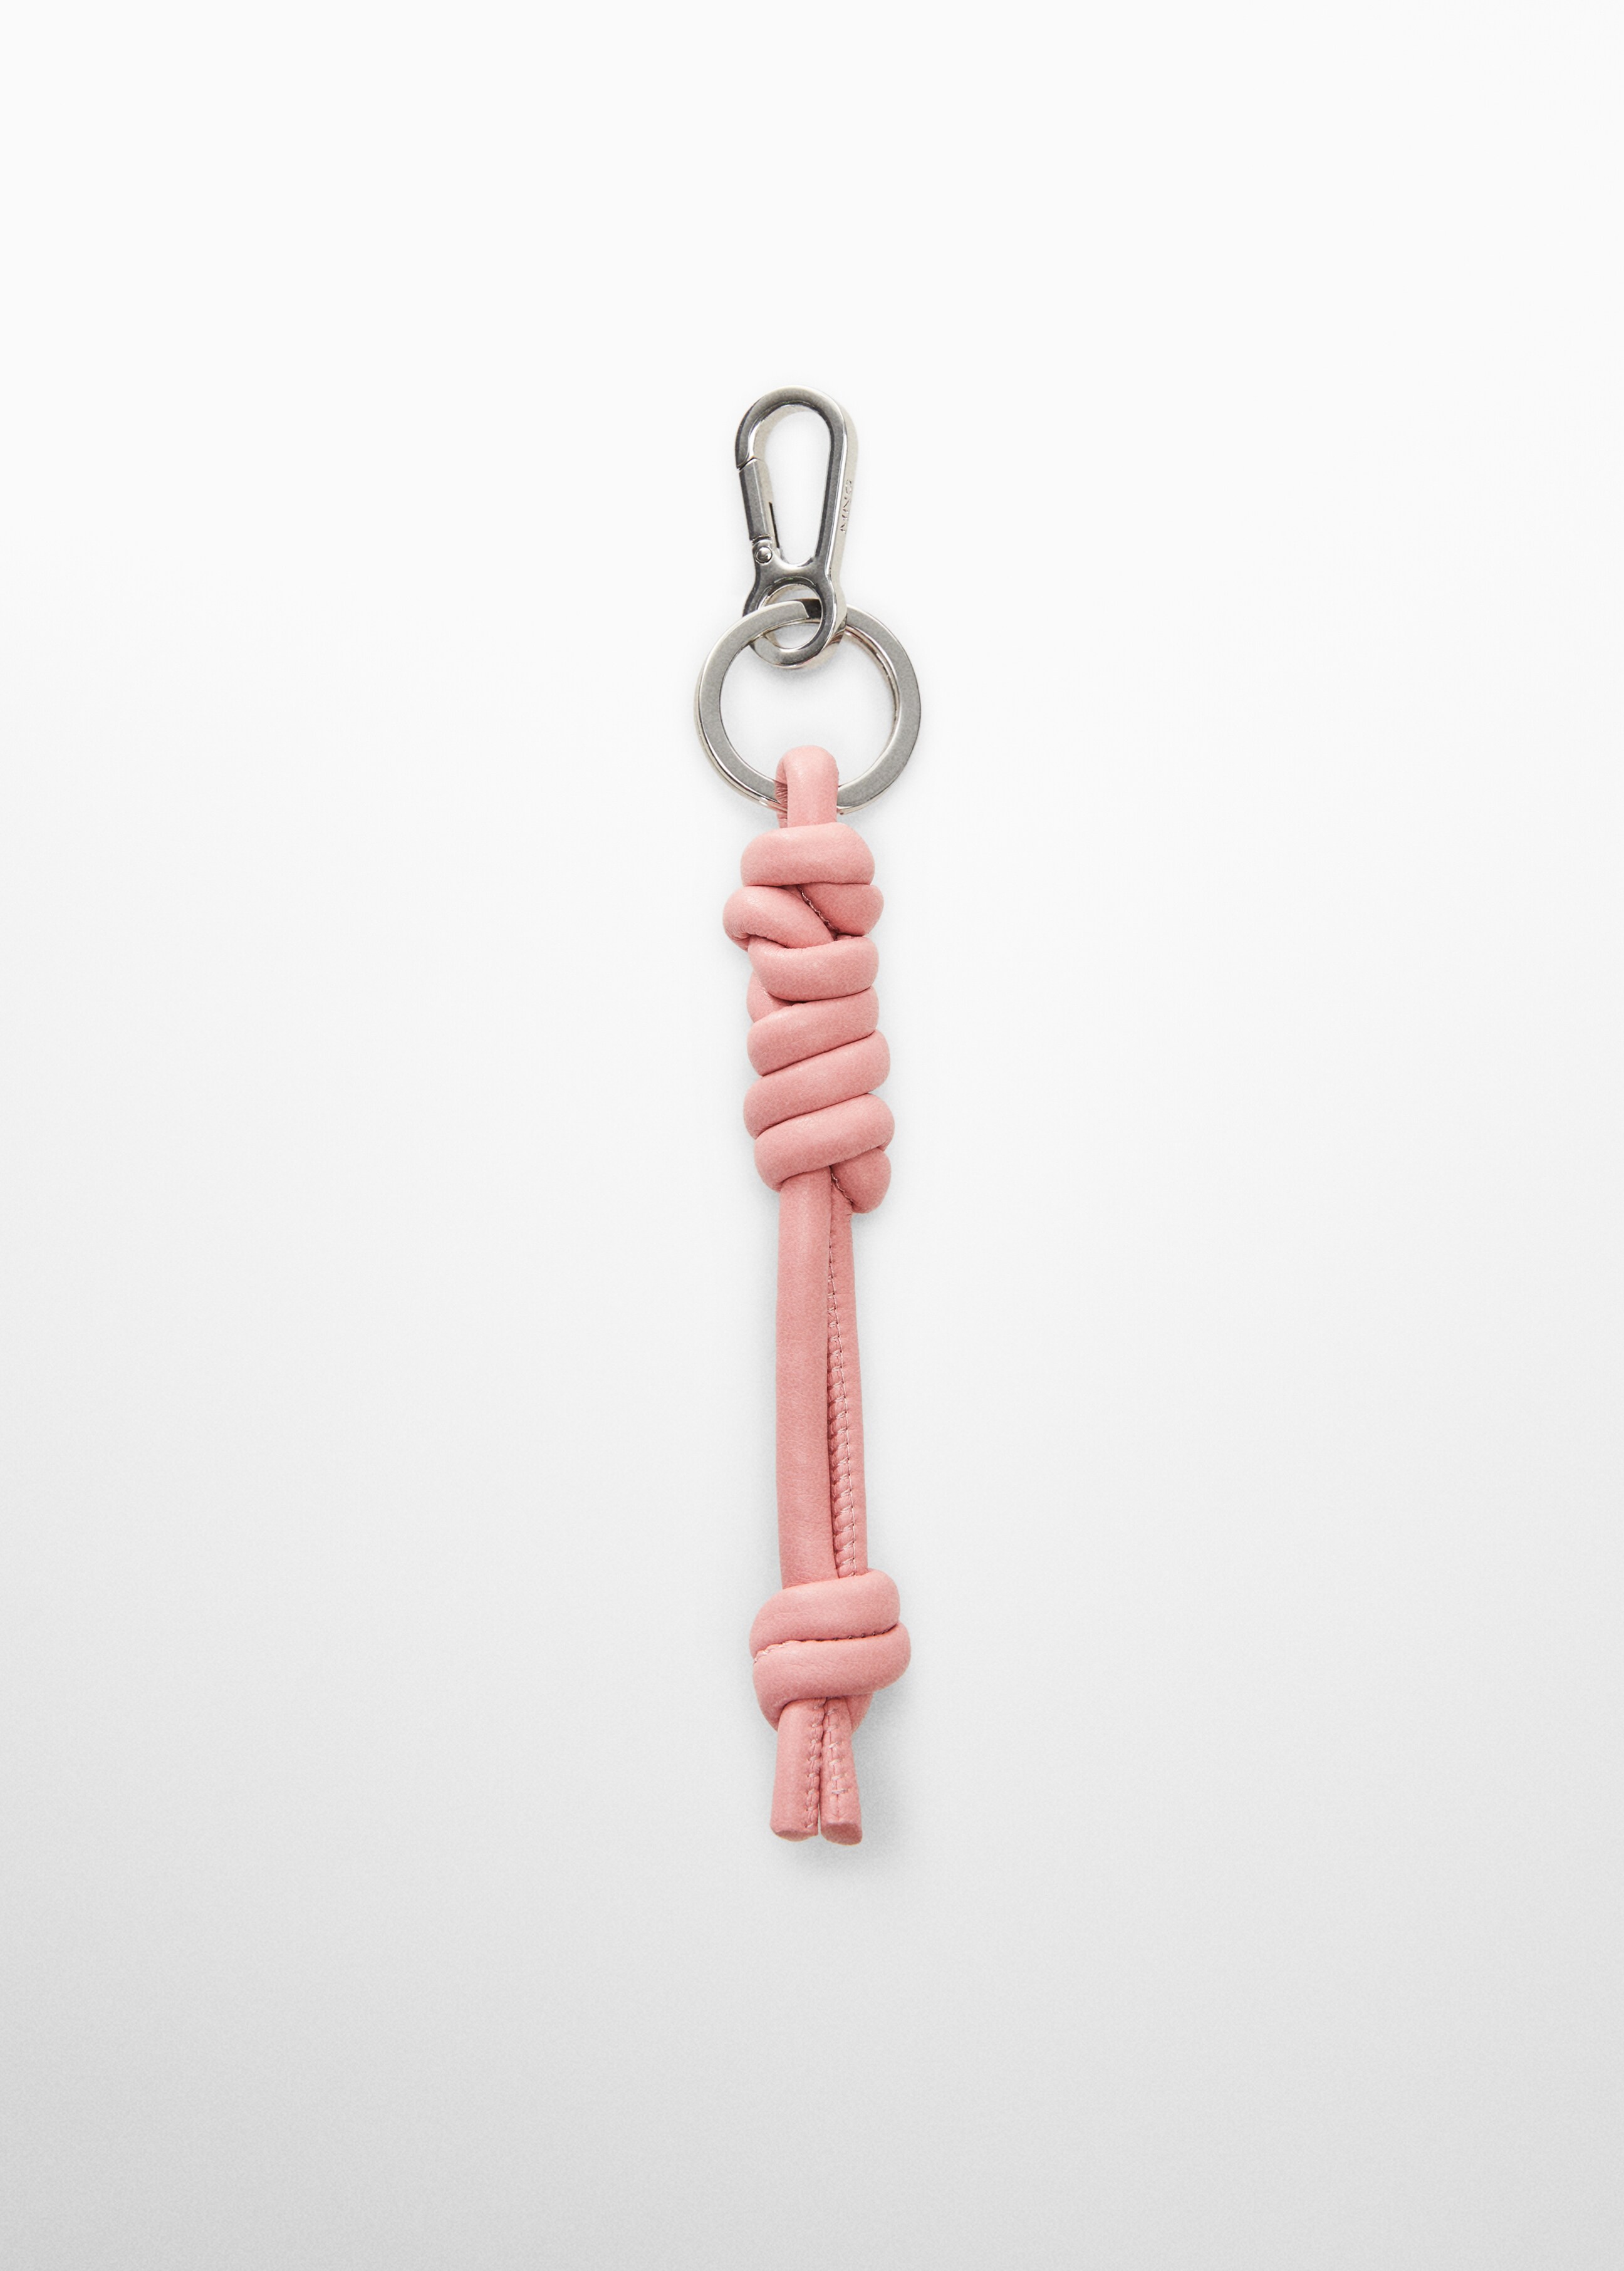 Leather-effect keychain with knot - Article without model